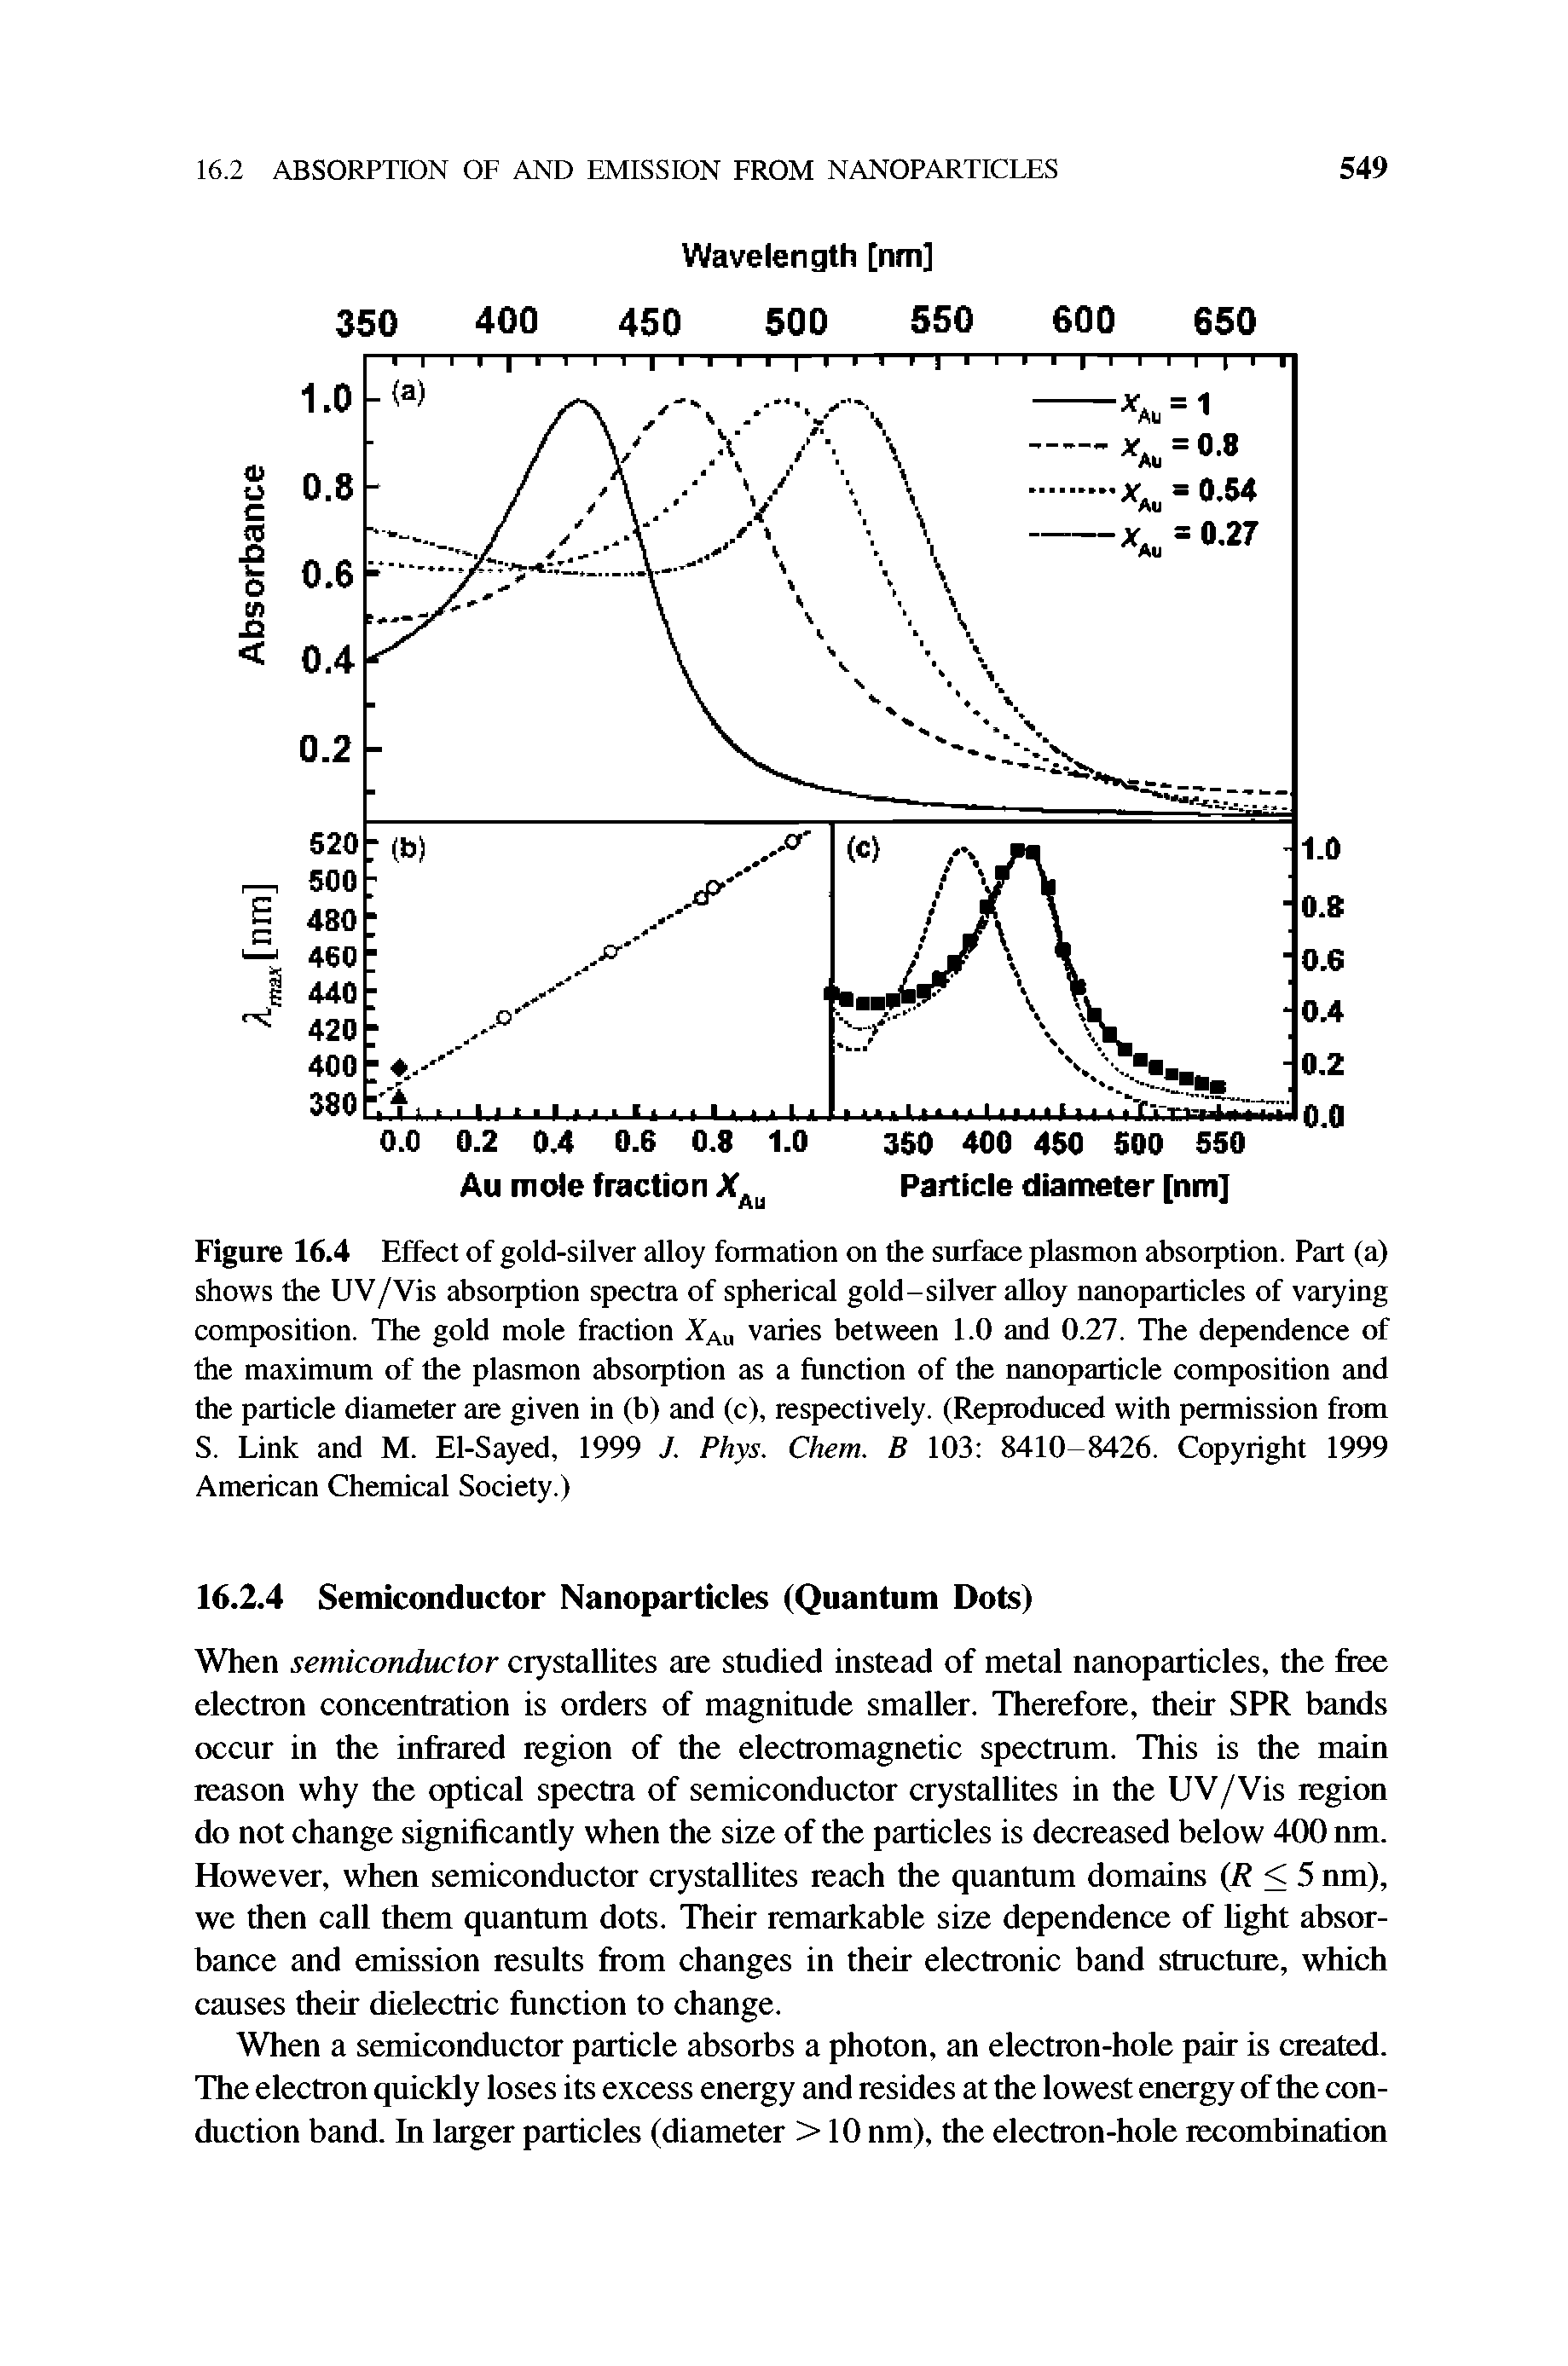 Figure 16.4 Effect of gold-silver alloy formation on the surface plasmon absorption. Part (a) shows the UV/Vis absorption spectra of spherical gold-silver alloy nanoparticles of varying composition. The gold mole fraction Xau varies between 1.0 and 0.27. The dependence of the maximum of the plasmon absorption as a function of the nanoparticle composition and the particle diameter are given in (b) and (c), respectively. (Reproduced with permission from S. Link and M. El-Sayed, 1999 J. Phys. Chem. B 103 8410-8426. Copyright 1999 American Chemical Society.)...